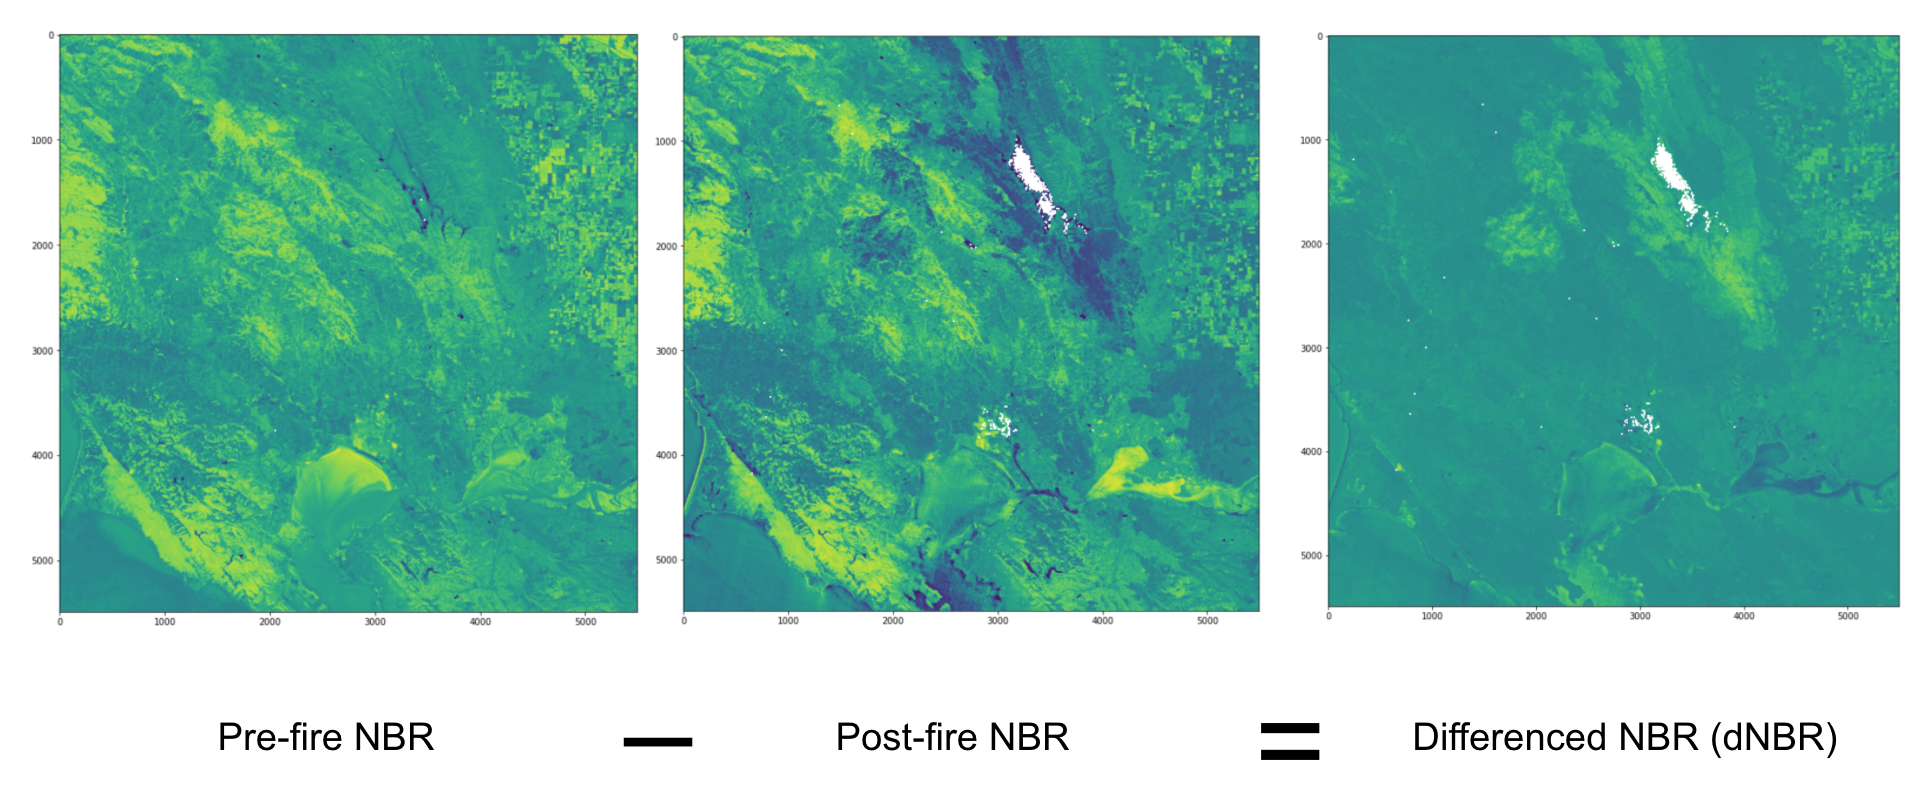 Figure 7. The Differenced Normalised Burn Ratio (dNBR) image (right) is calculated from Sentinel-2 Level 2A data by subtracting the pre-fire NBR on 7 August 2020 (left) from the post-fire NBR on 25 November 2020 (middle).